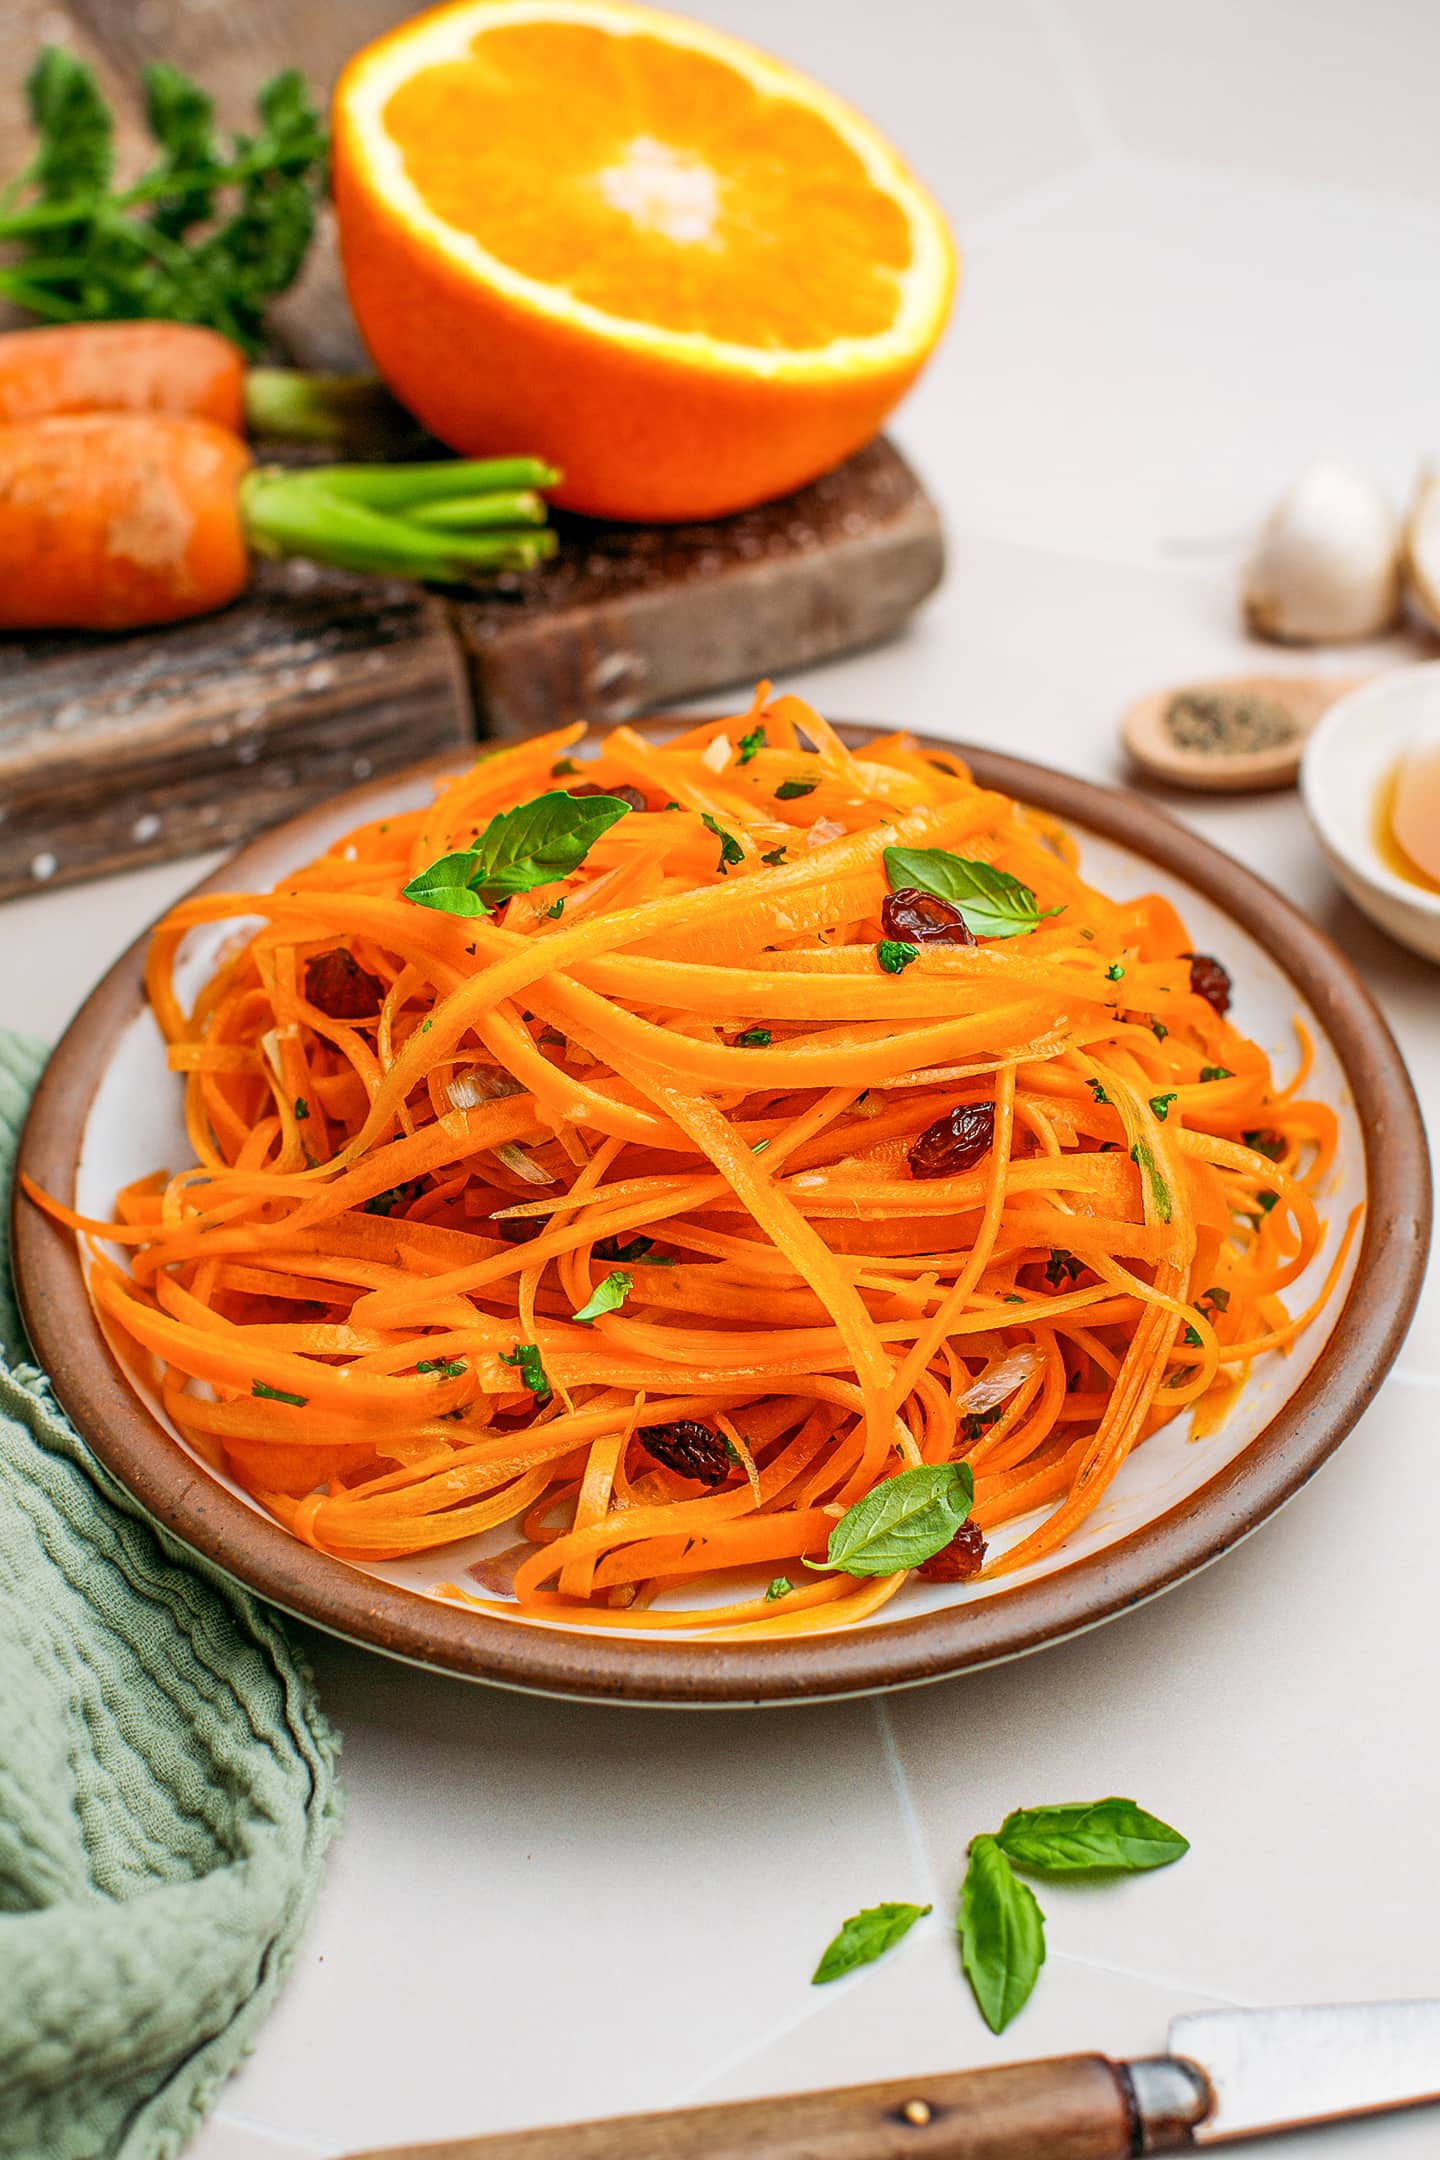 French carrot salad with basil and raisins on a plate.